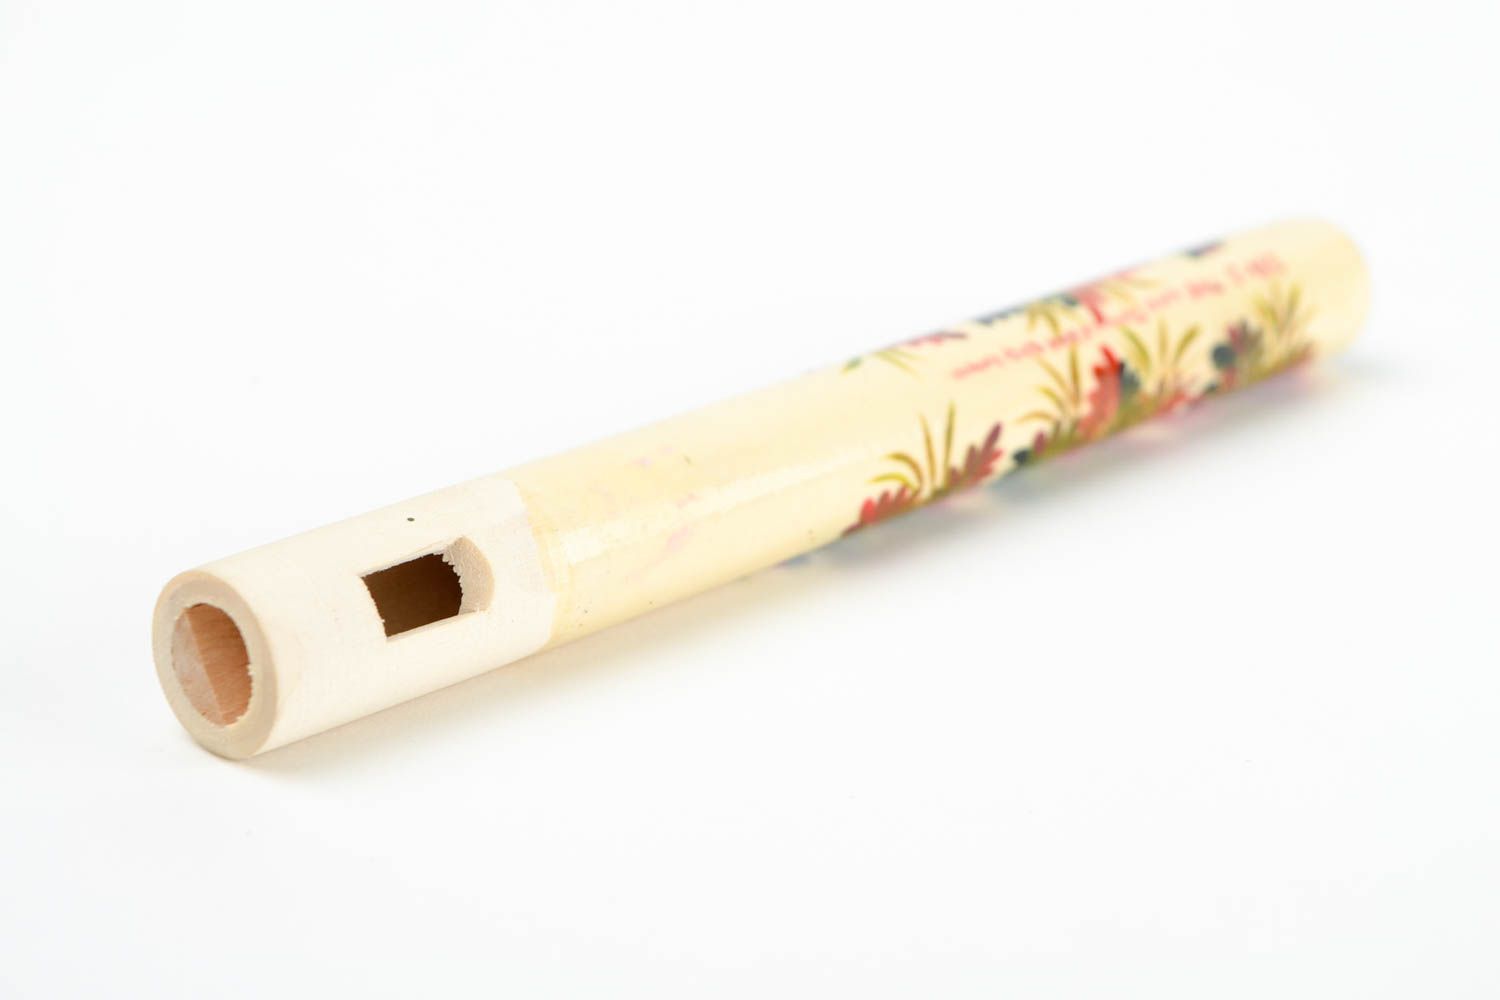 Handmade penny whistle wooden flute decorative use only unusual souvenir photo 5